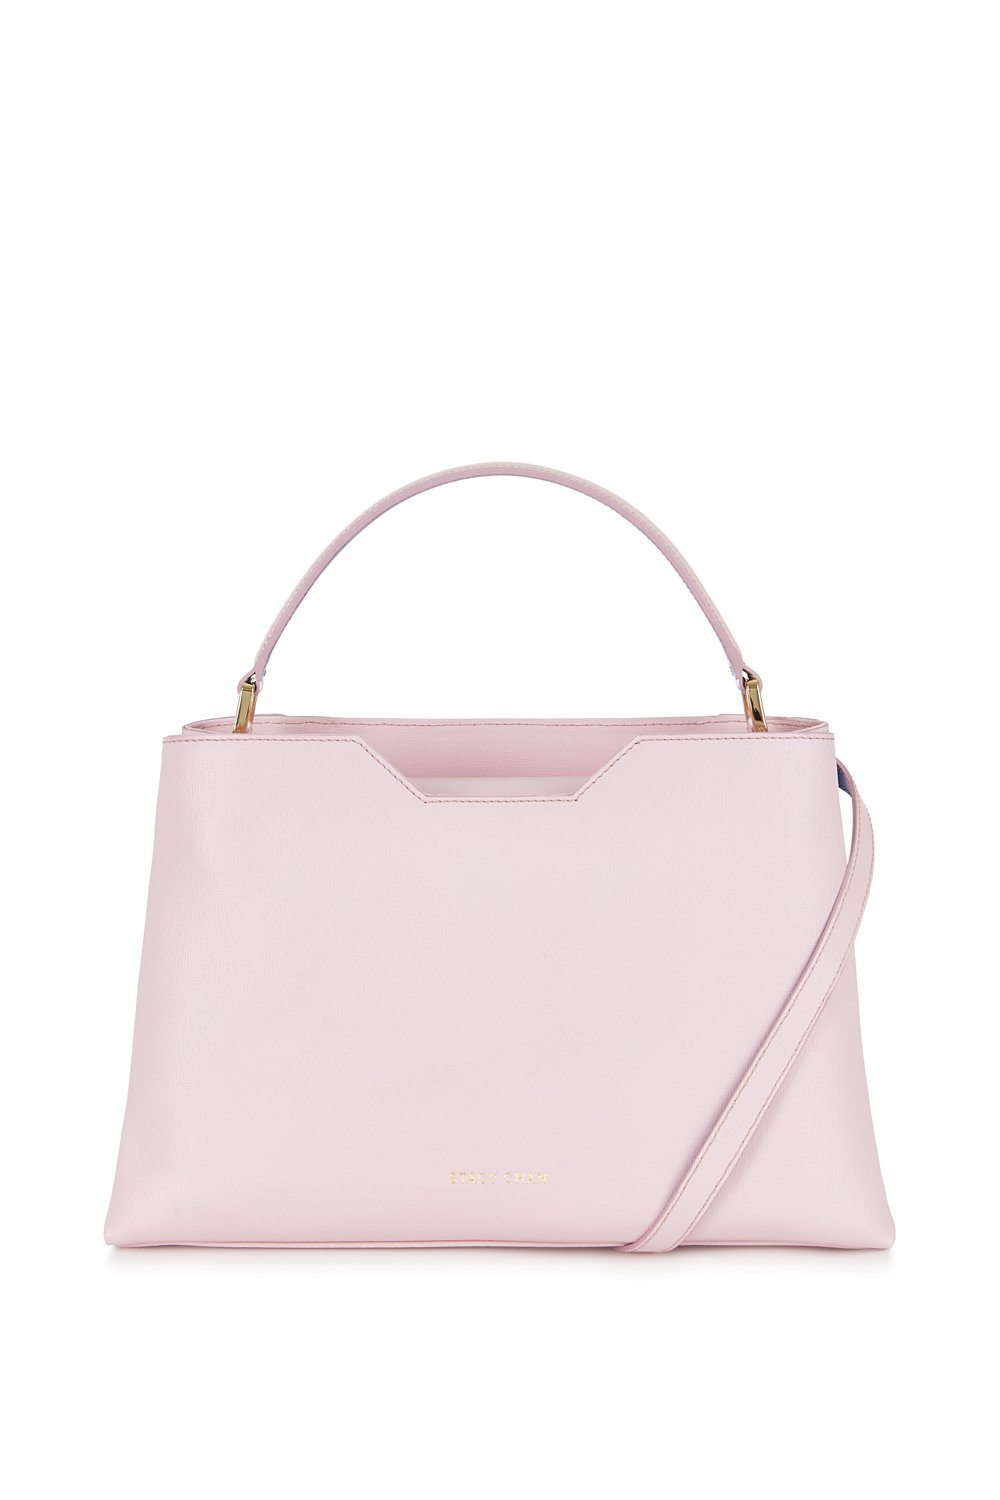 Midi Amy Tote in Peony Saffiano Leather – Stacy Chan Limited